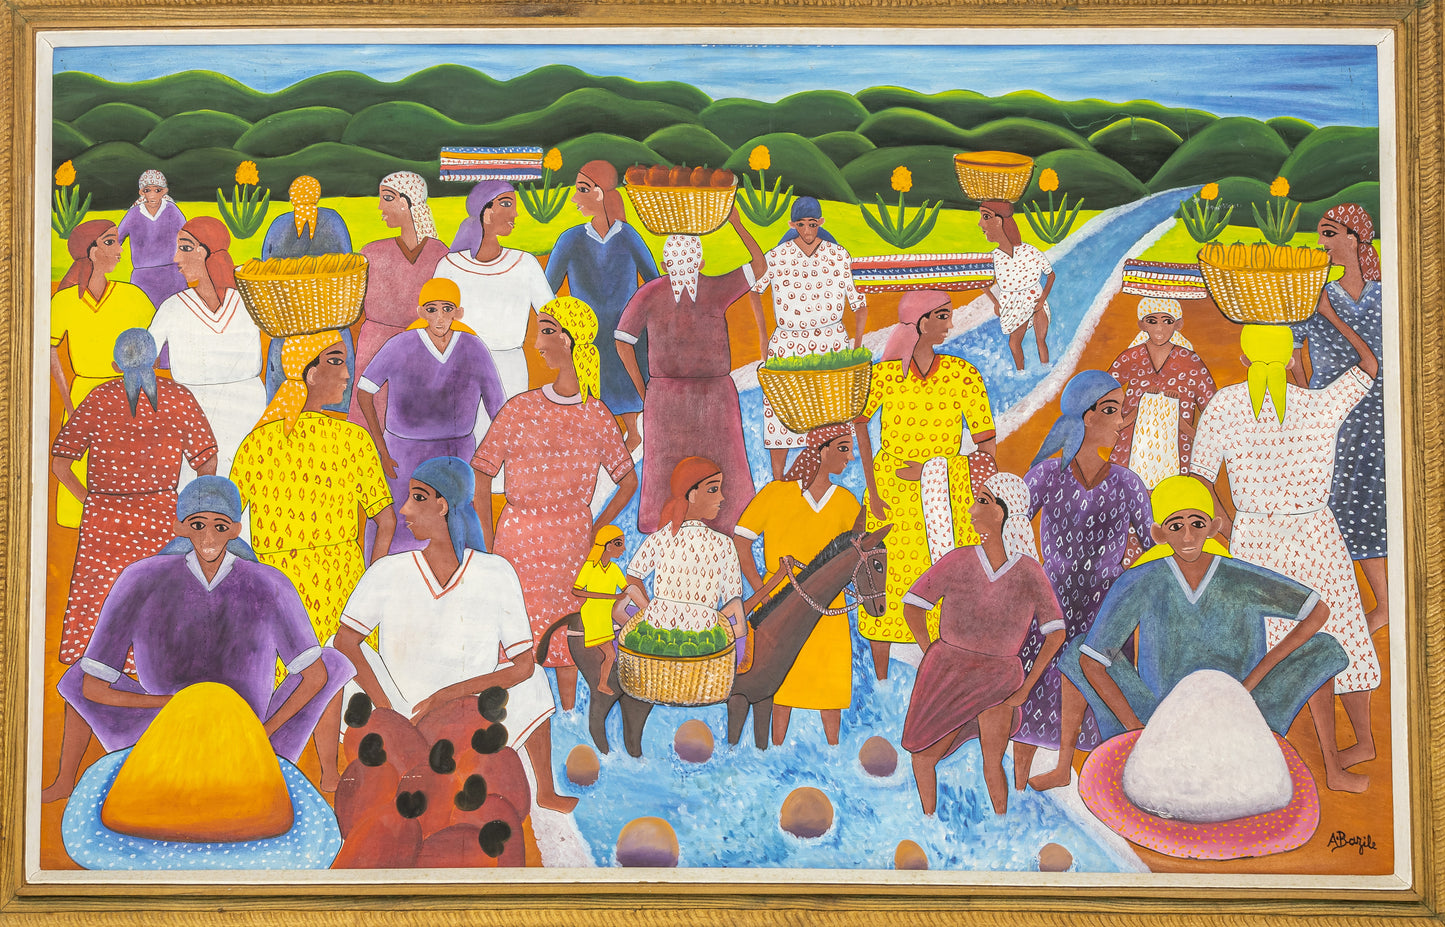 Alberoi Bazile (1920-2005) 30"x47.25" Market Scene by the River c1980 Oil on Masonite Framed Painting #18SS